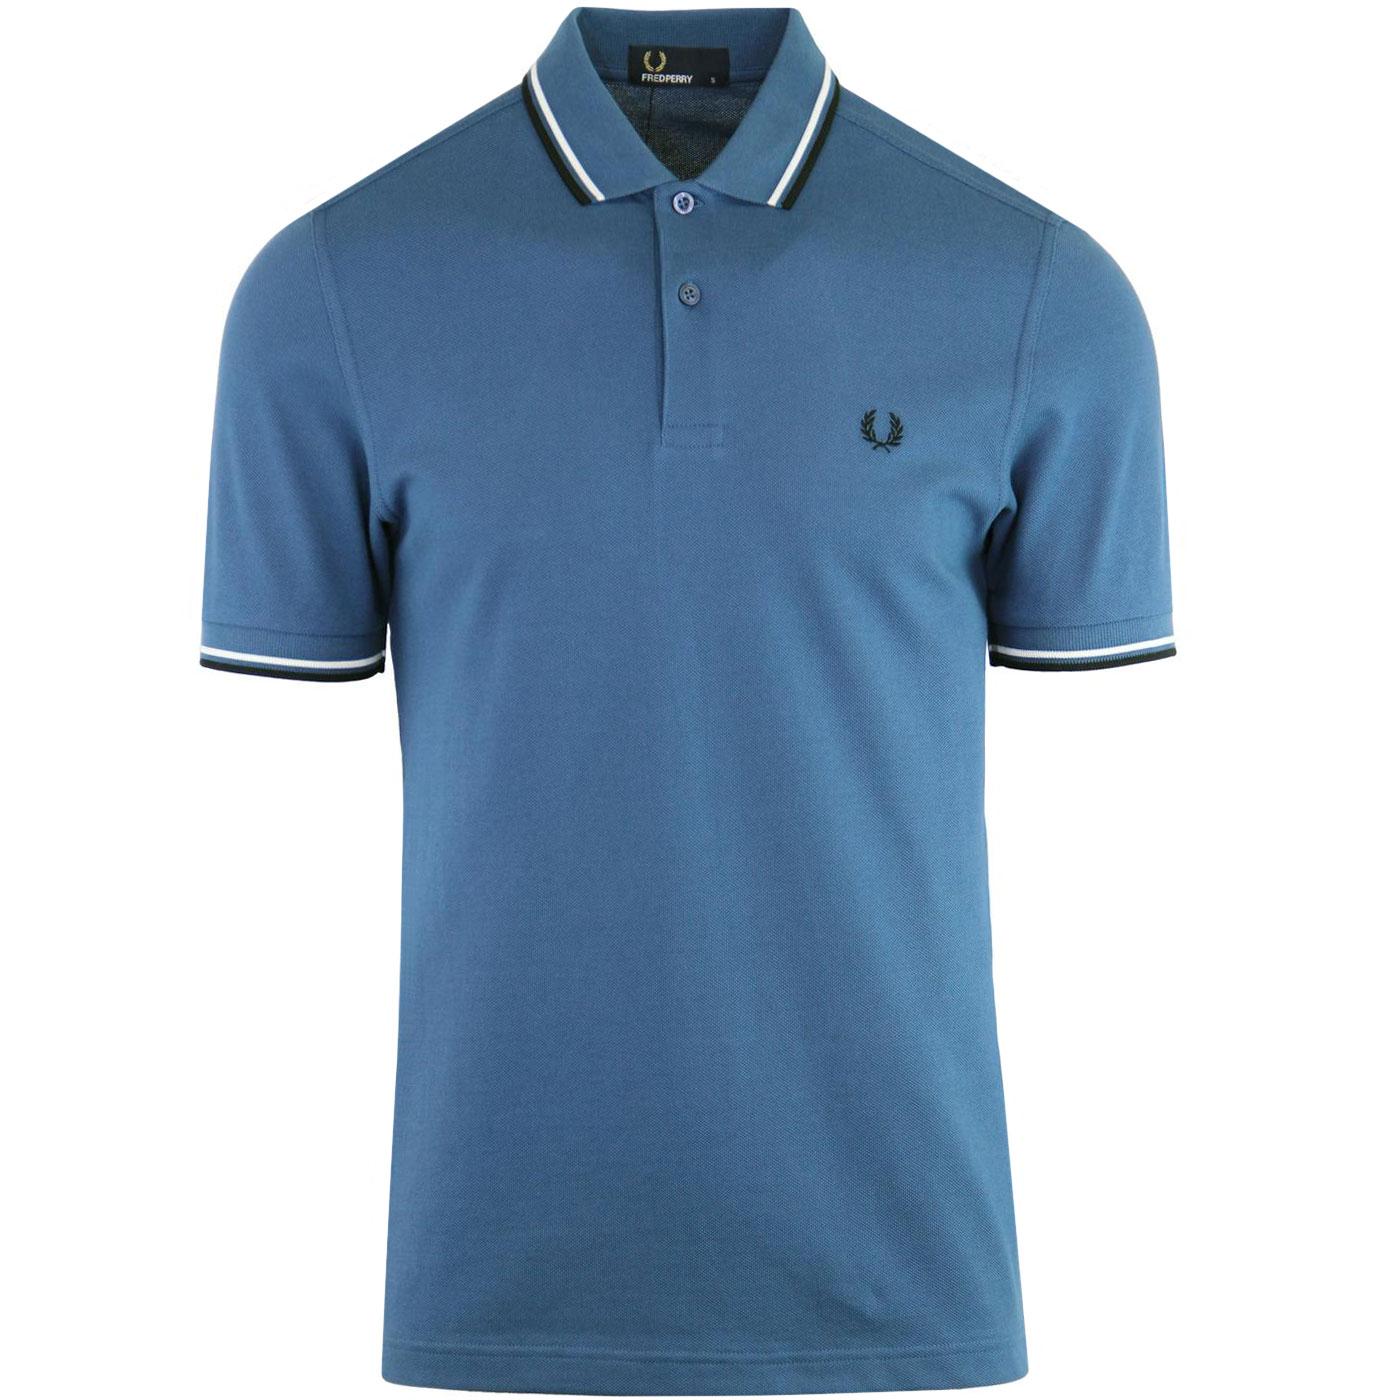 FRED PERRY M3600 Mod Twin Tipped Polo Shirt (MB)